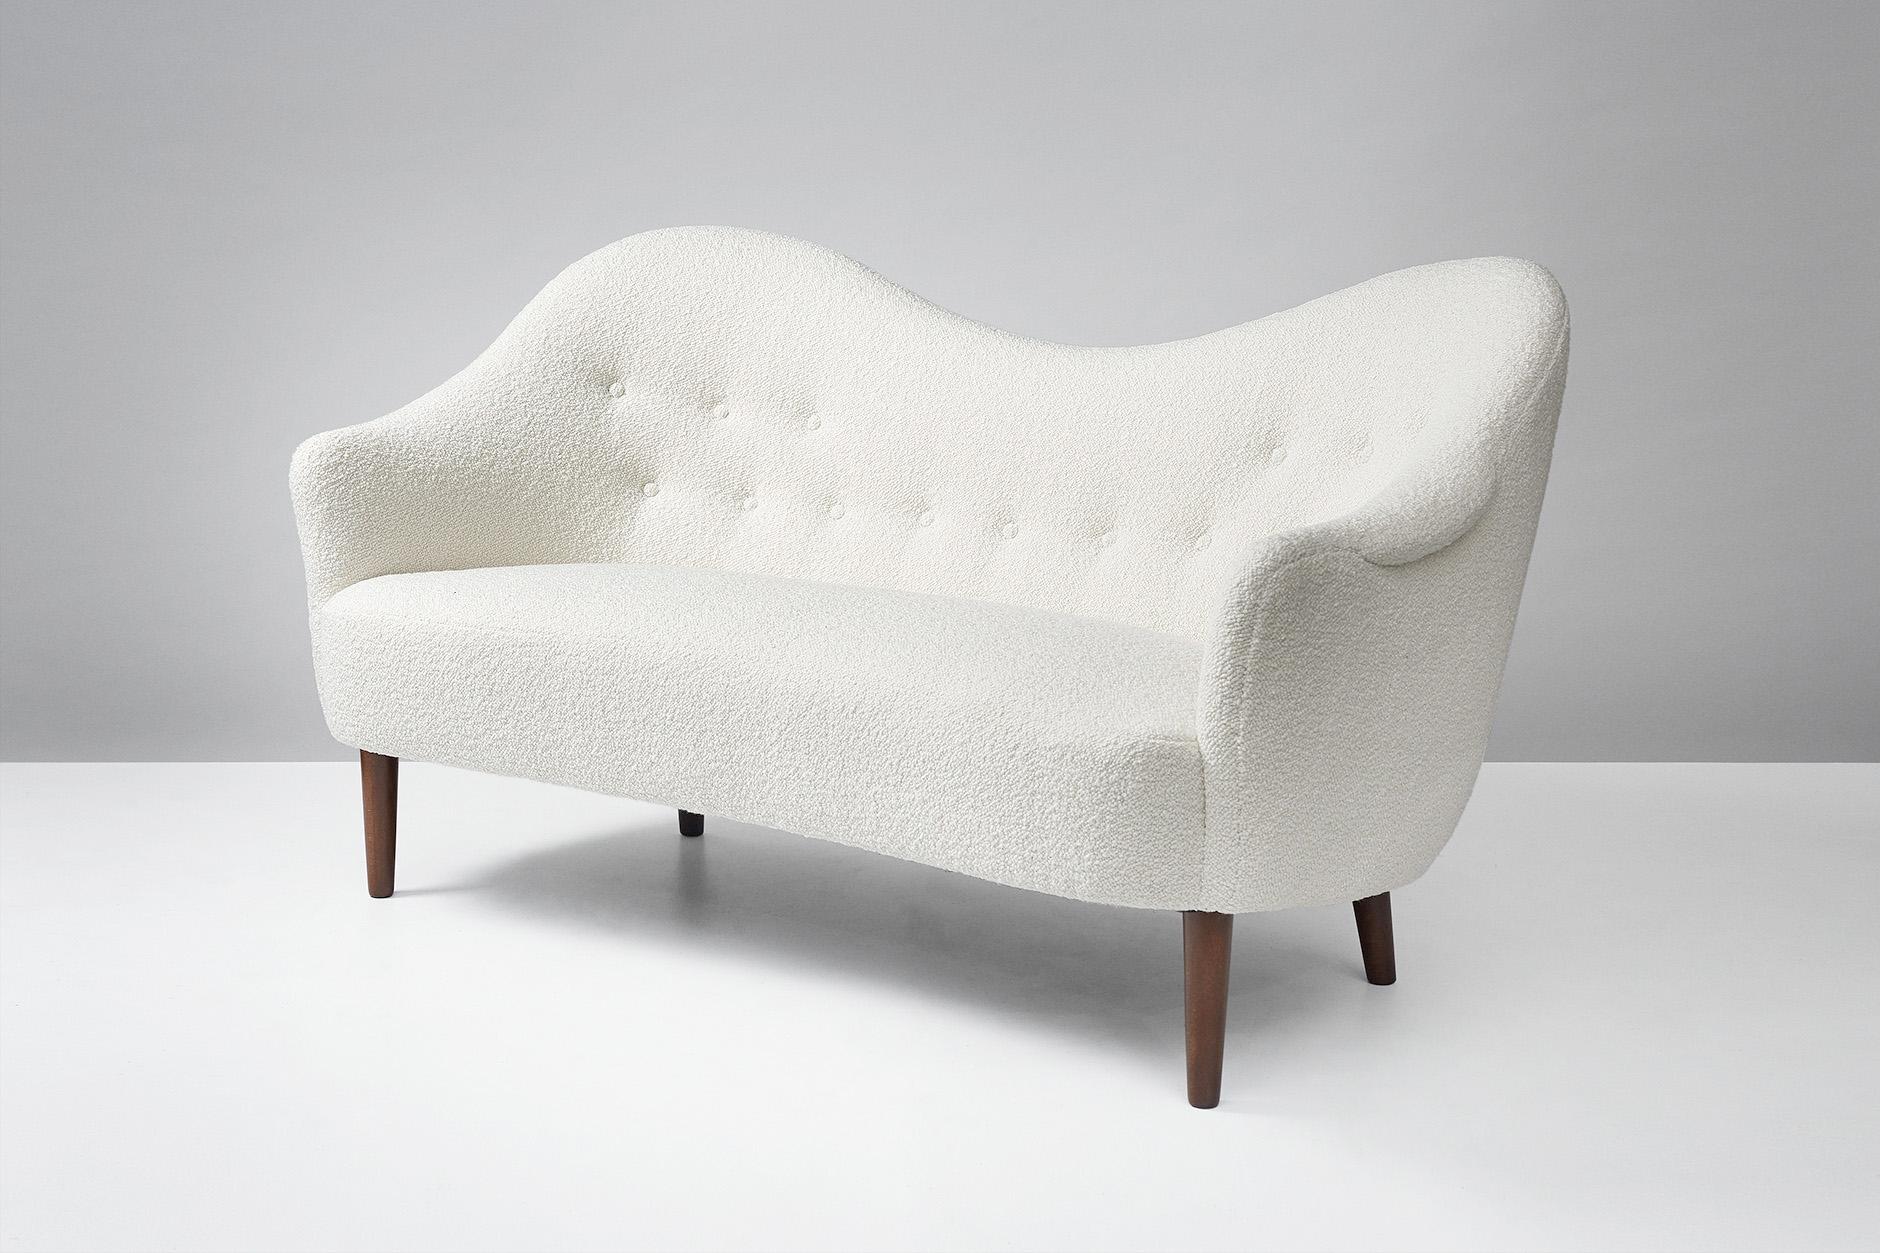 Carl Malmsten 'Sampsel' Sofa

First designed in 1956 and produced by AB Record, Bollnas, Sweden. This example has been reupholstered in luxurious boucle wool fabric from Dedar, Milan. Stained beech legs.